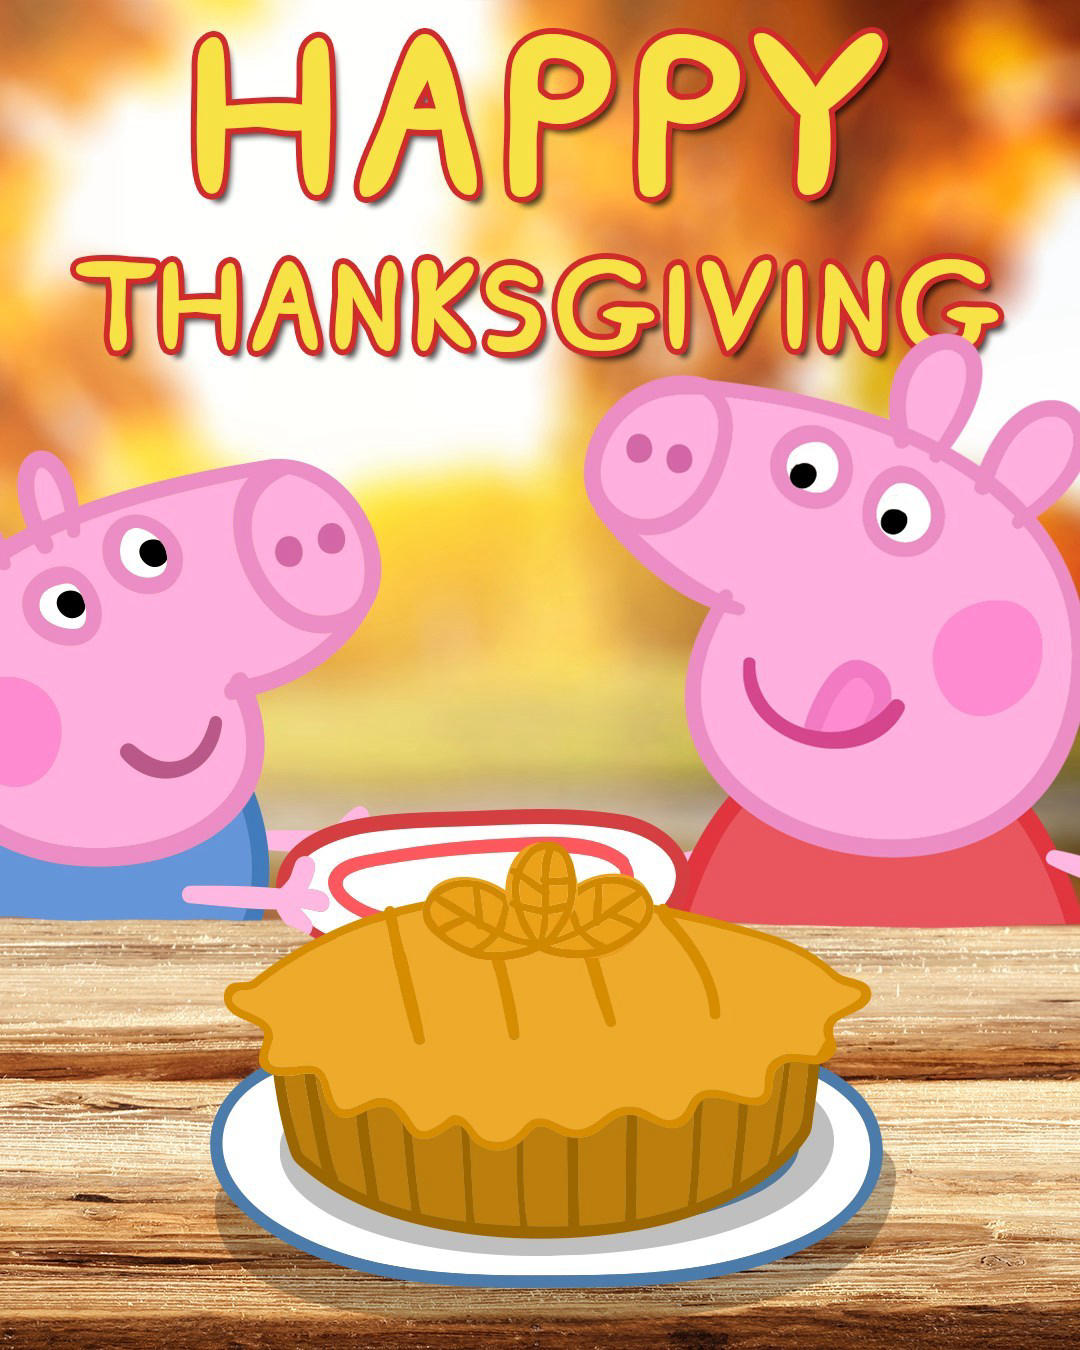 Peppa Pig - Happy Thanksgiving to you and your loved ones